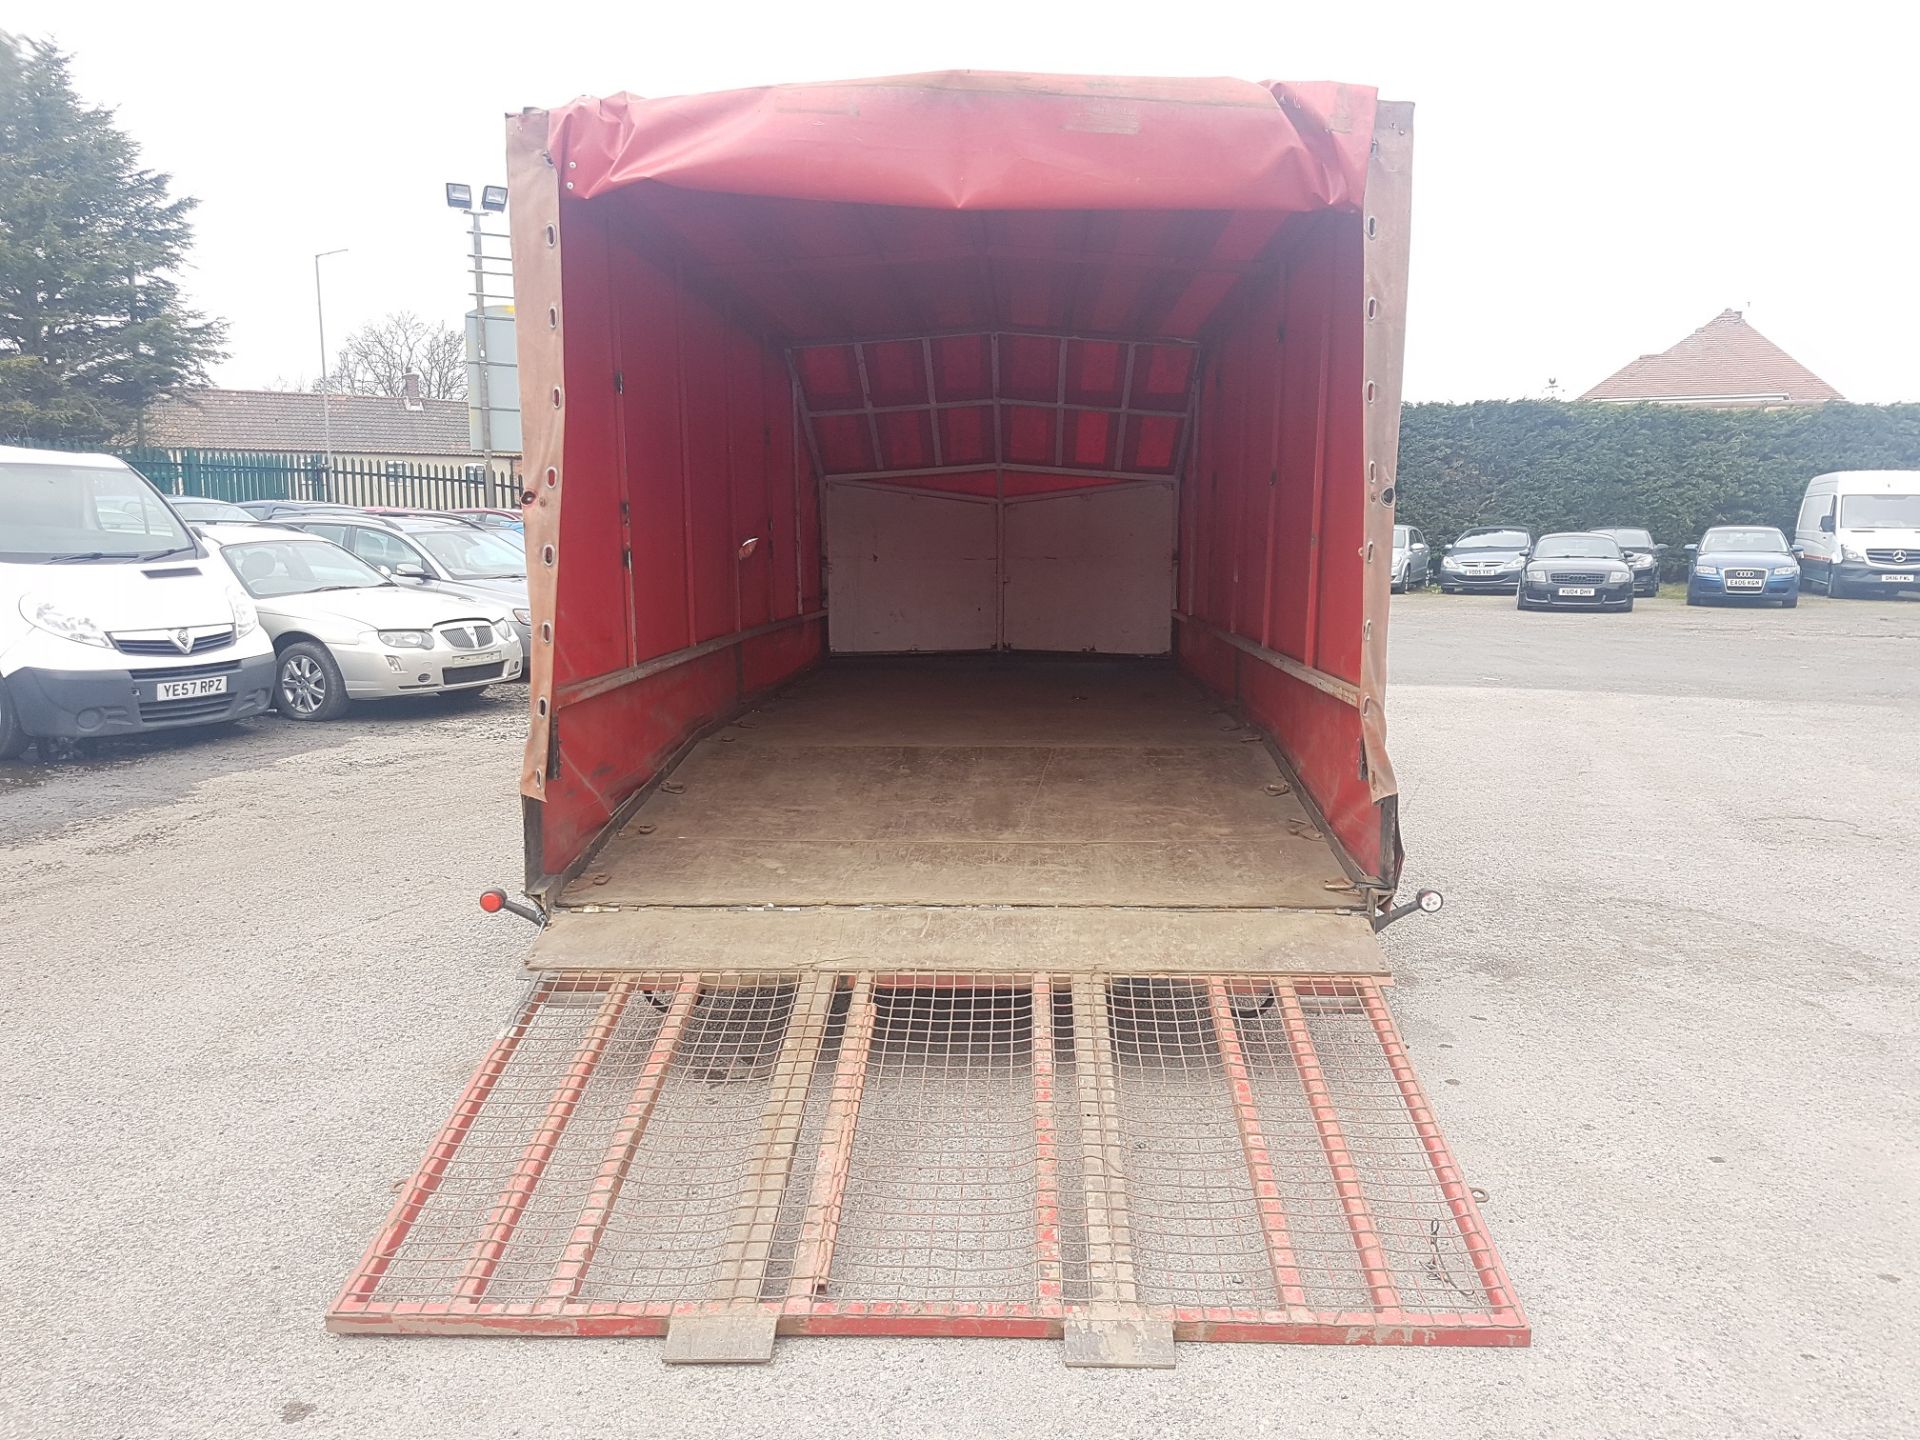 TRI-AXLE BEAVER-TAIL CAR TRANSPORTER COVERED TRAILER - 5.5 METRE BED LENGTH!  *PLUS VAT*   CAN FIT A - Image 10 of 14